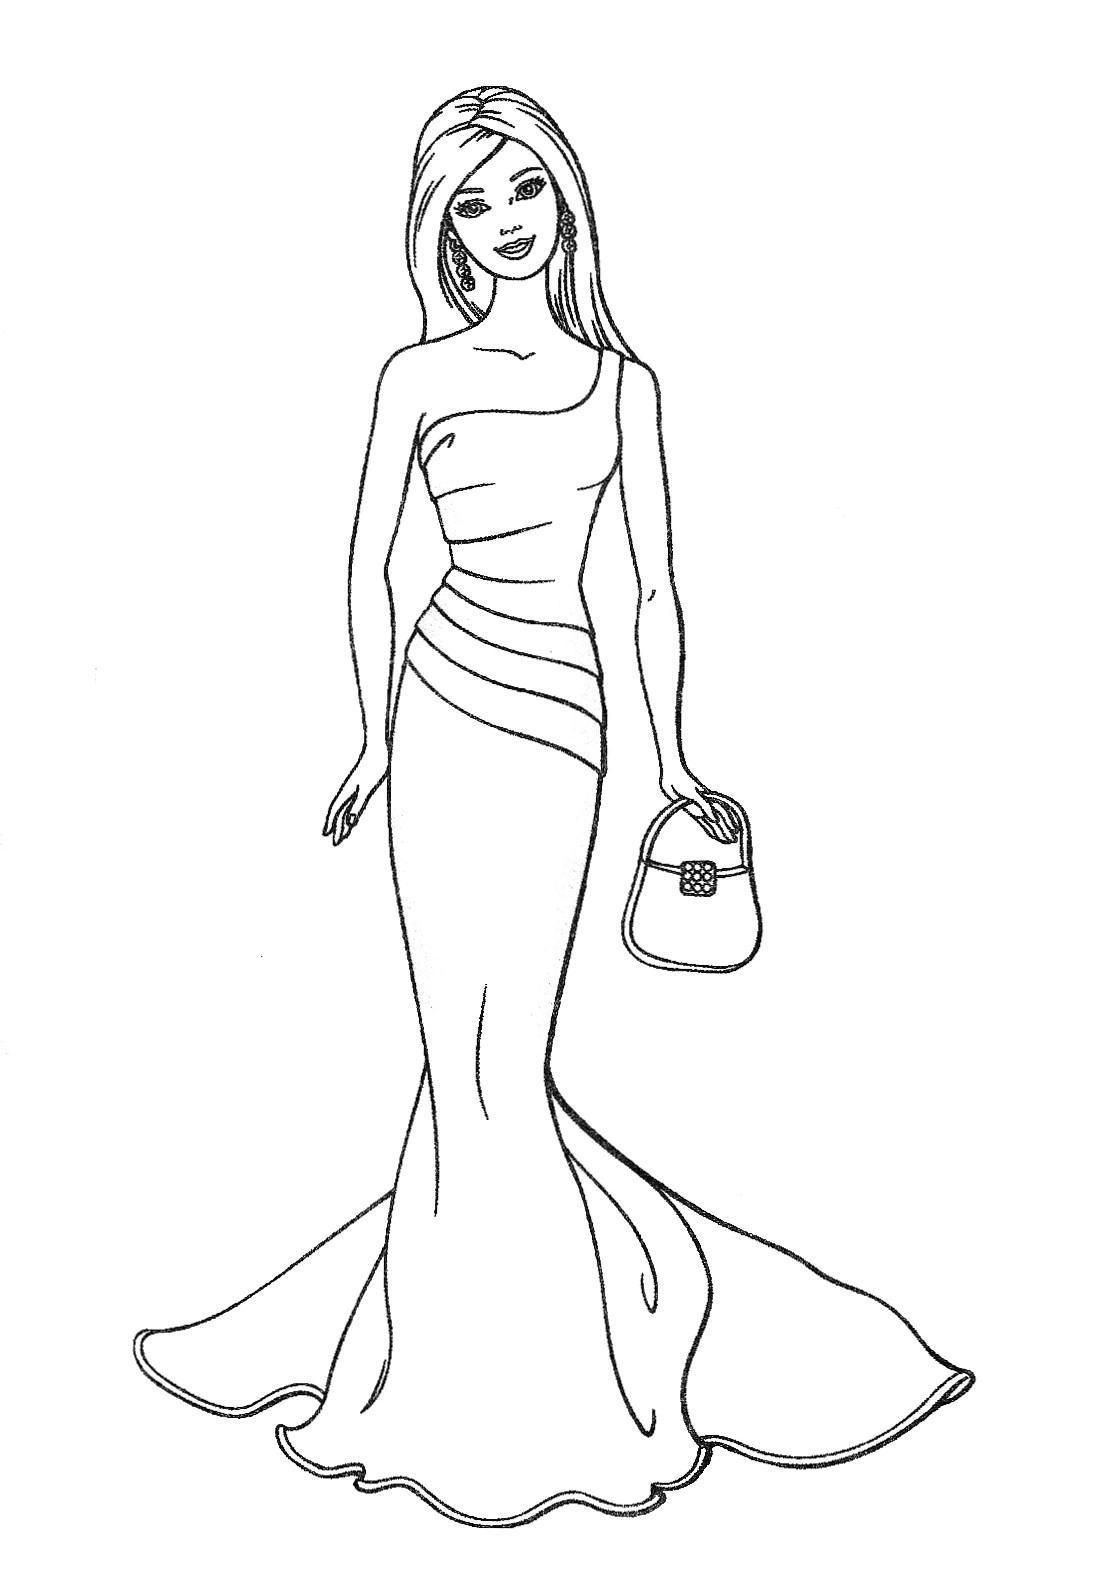 Free Printable Barbie Coloring Pages, Activity Sheets, Paper Crafts - Free Printable Barbie Coloring Pages